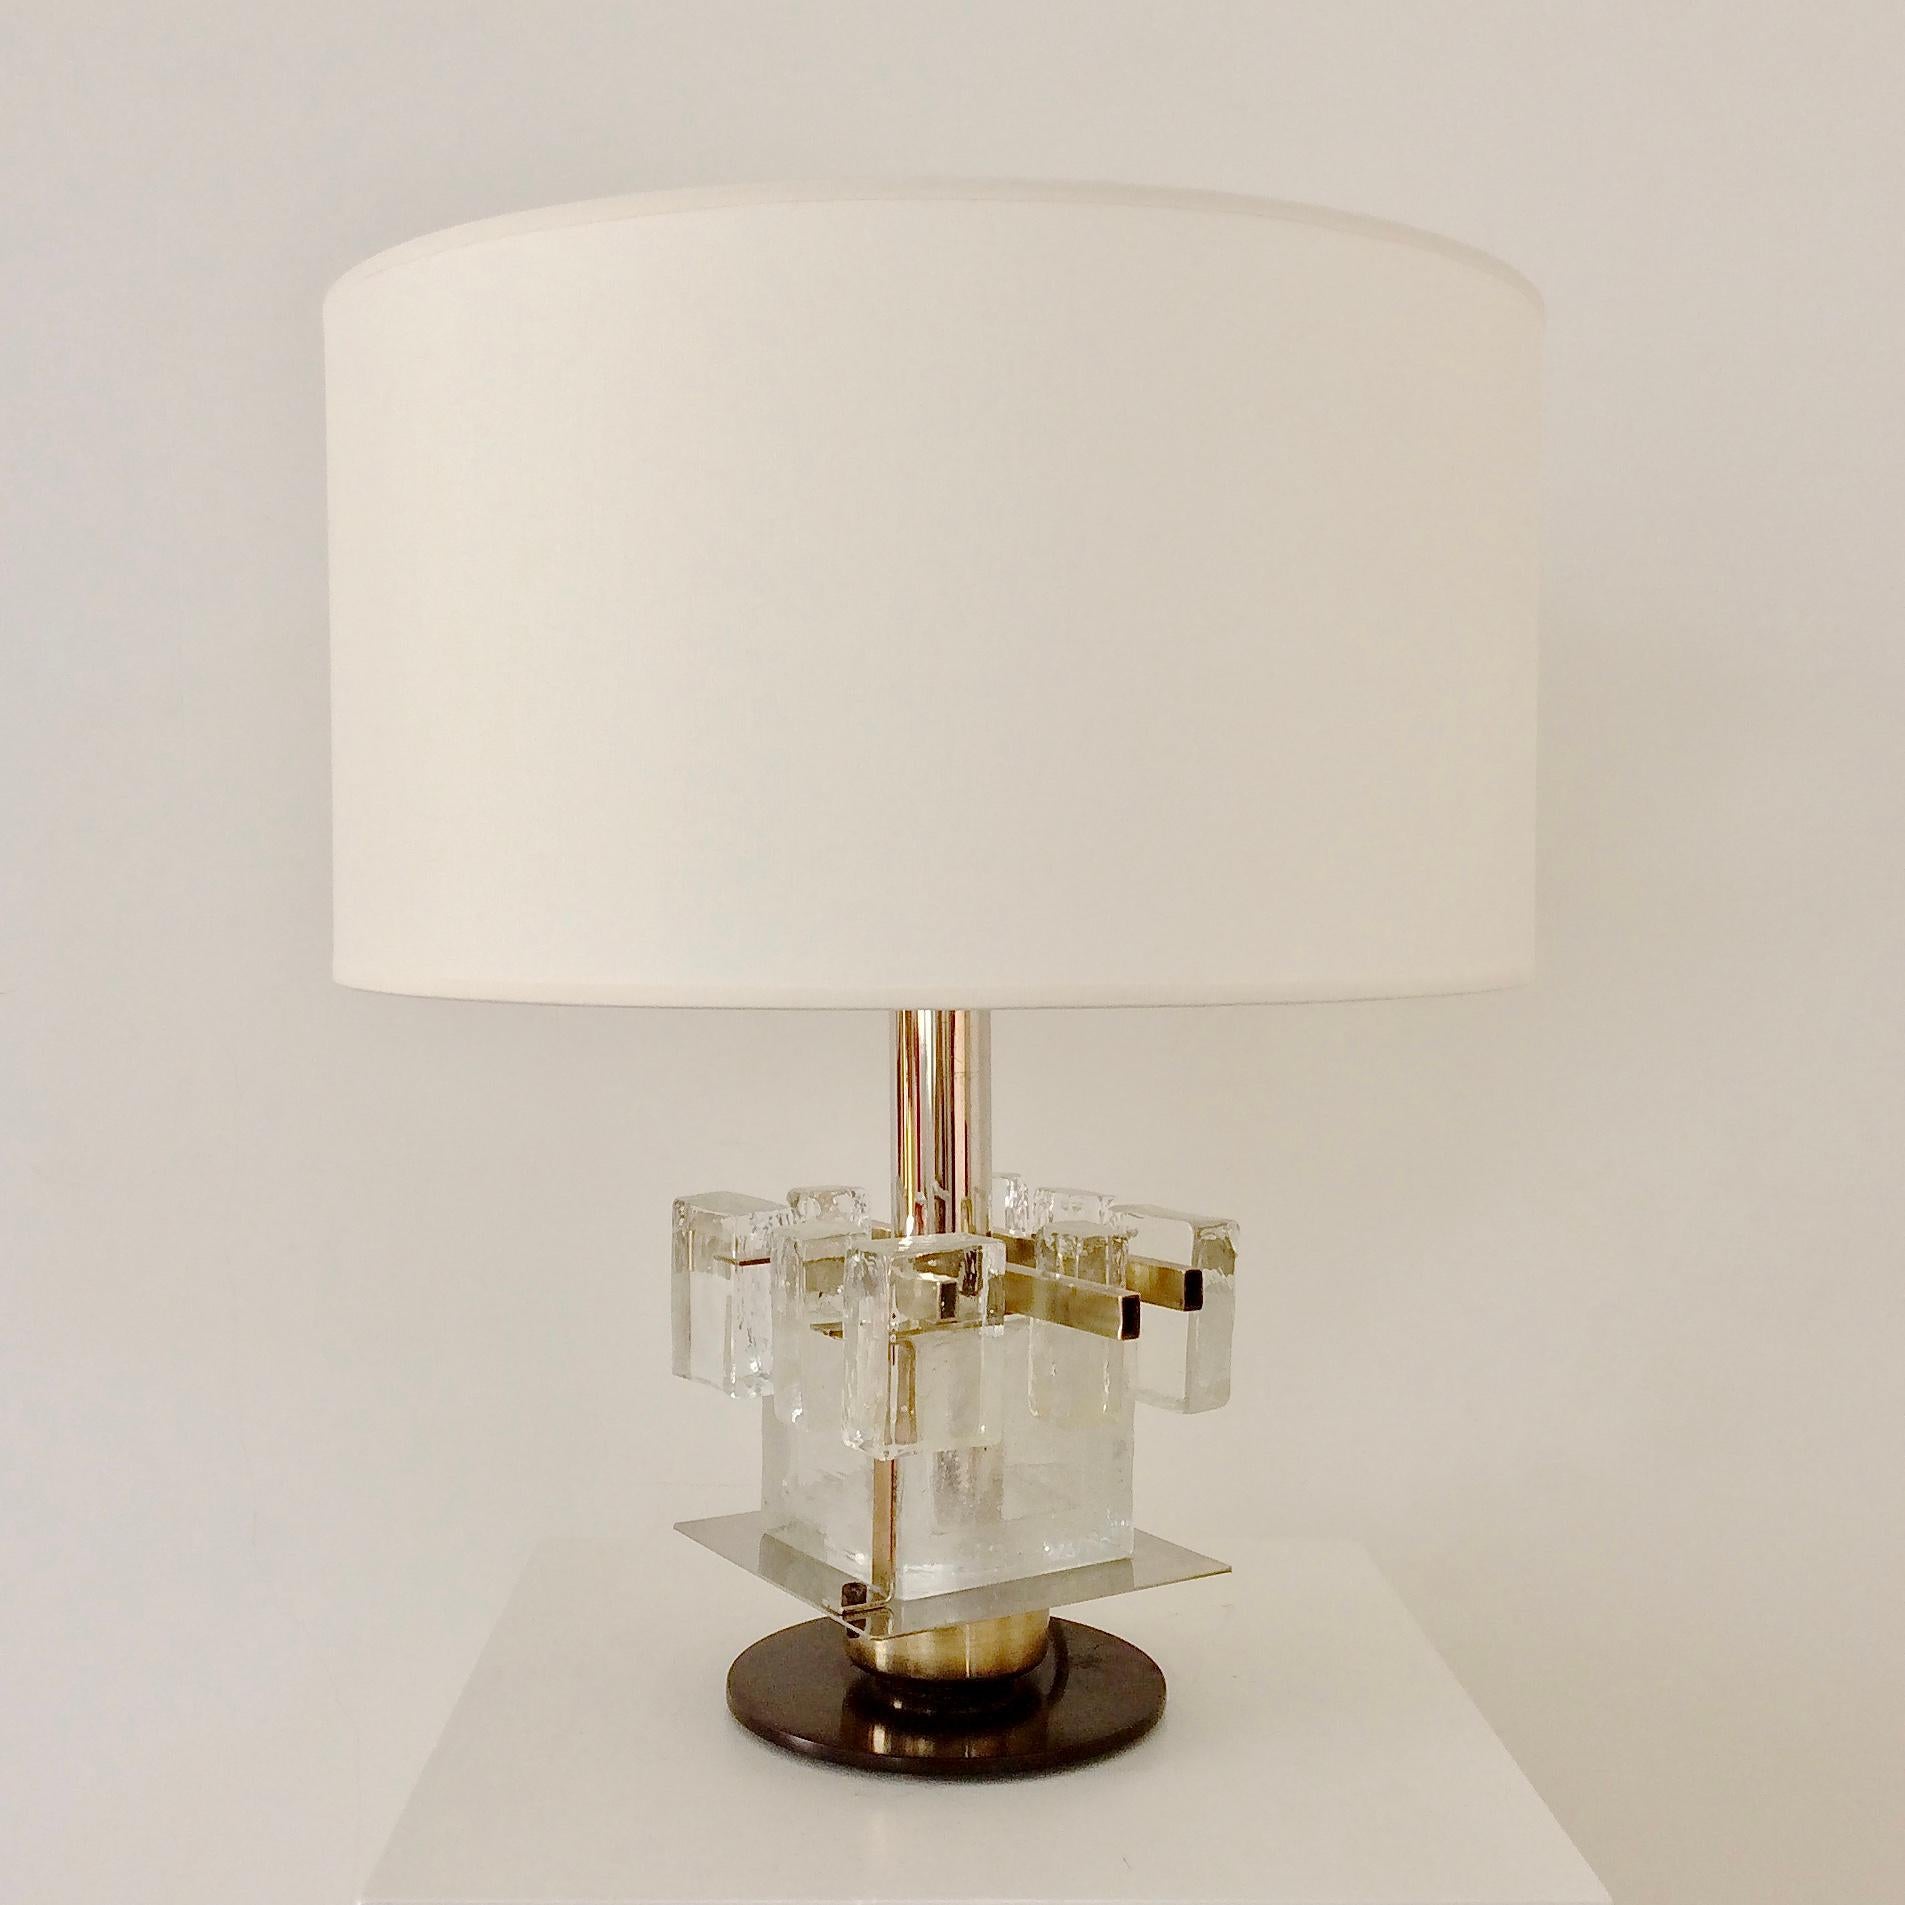 Italian Murano Glass Table Lamp Attributed to Poliarte, circa 1960, Italy For Sale